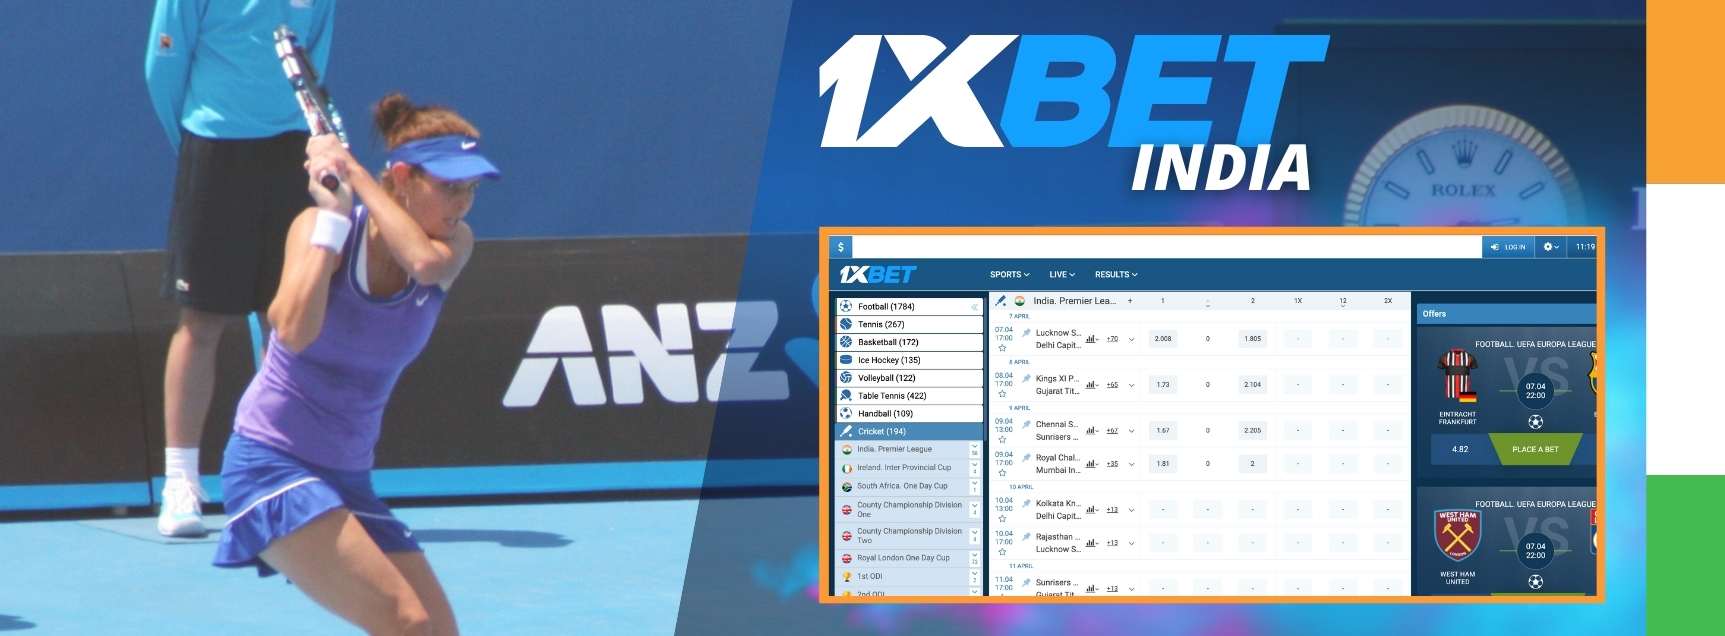 1xBet India betting site full review